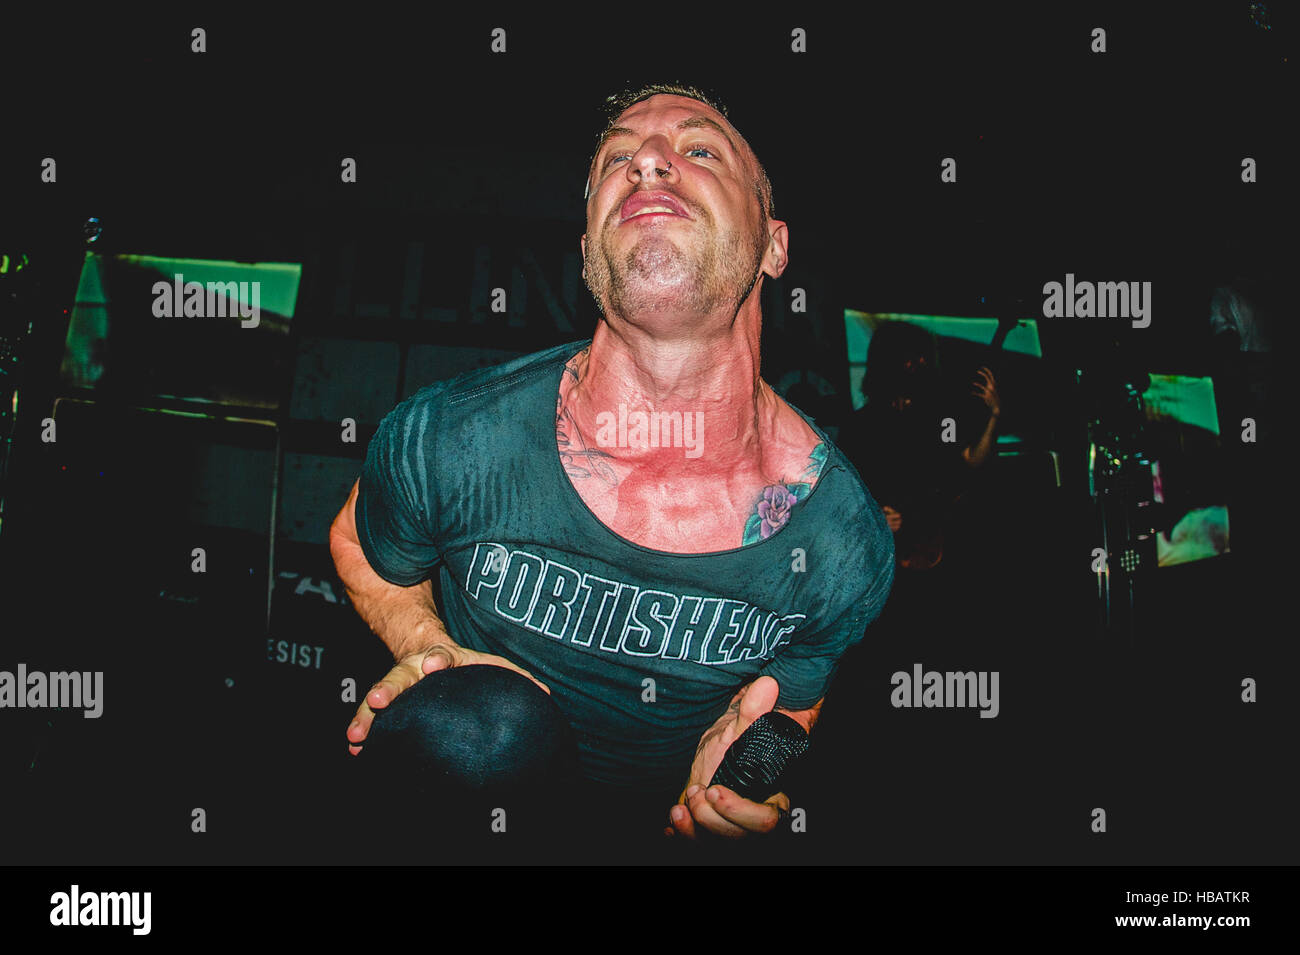 Romagnano Sesia, Italy. 04th Oct, 2013. The Dillinger Escape Plan performing live at the Rock n Roll Arena in Romagnano Sesia. © Alessandro Bosio/Pacific Press/Alamy Live News Stock Photo